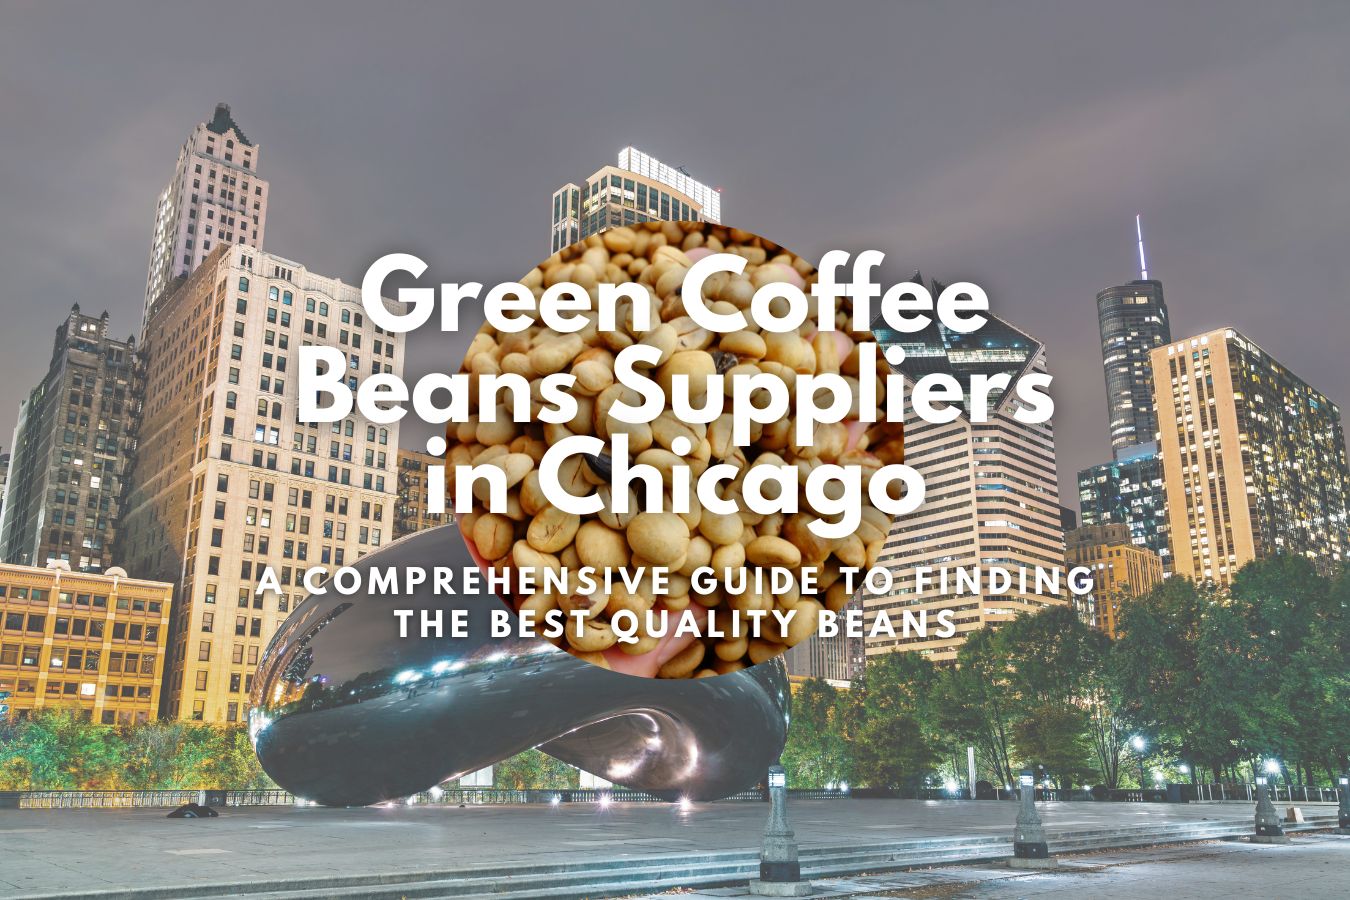 Green Coffee Beans Suppliers in Chicago A Comprehensive Guide to Finding the Best Quality Beans